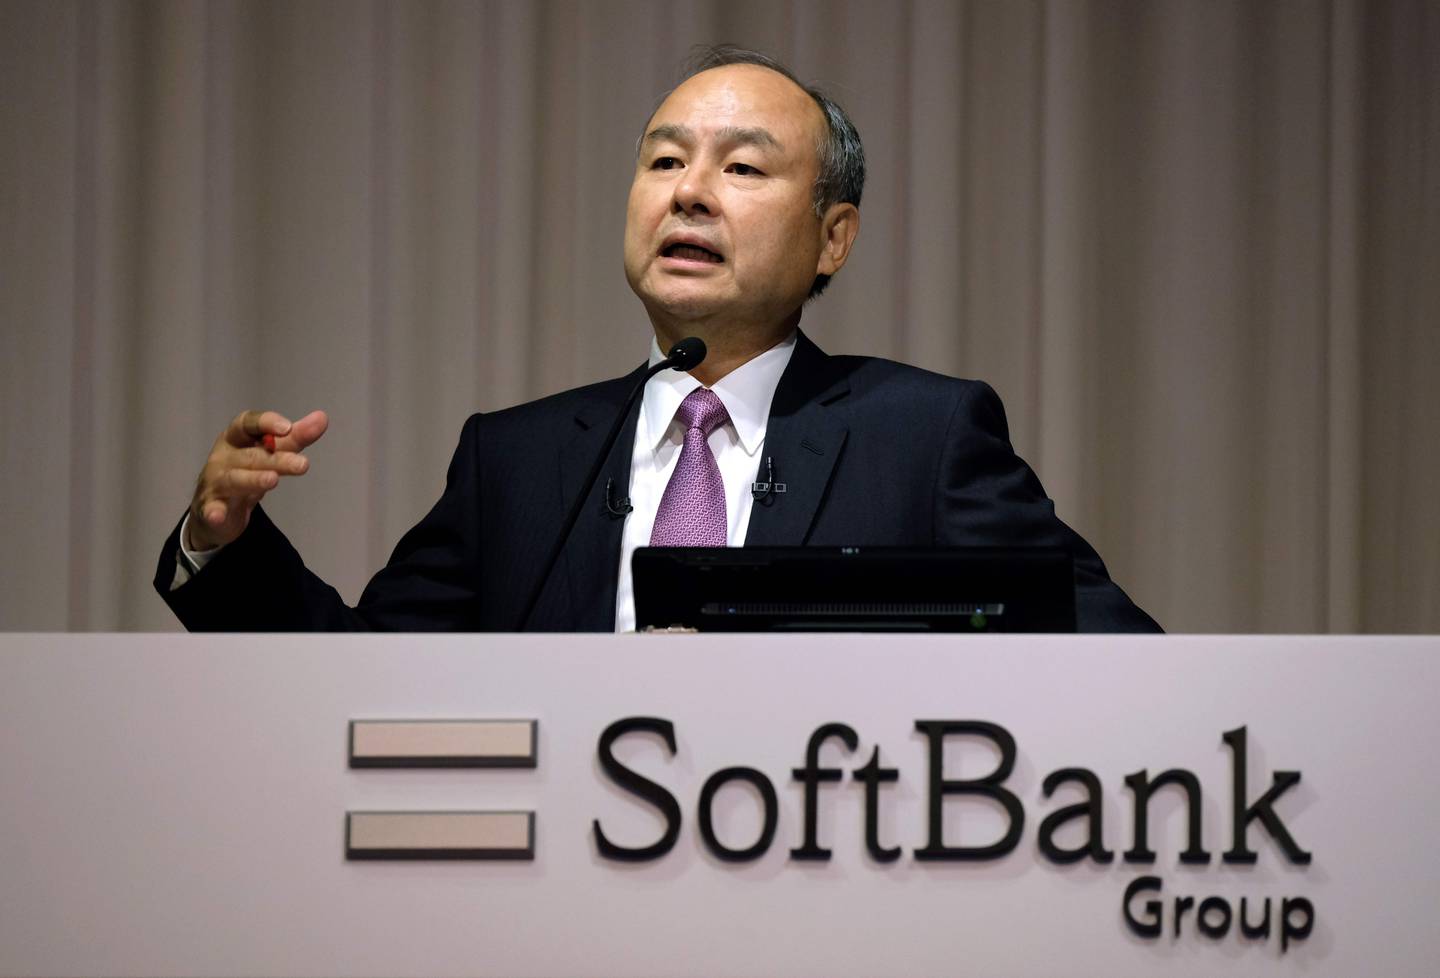 Japan's SoftBank Group CEO Masayoshi Son answers questions during a press conference on the company's financial results in Tokyo on November 6, 2019.   Japanese giant SoftBank Group said Wednesday it suffered an operating loss of $6.4 billion in the second quarter, the worst in its history, taking a hit from investments in start-ups including WeWork and Uber. / AFP / Kazuhiro NOGI
